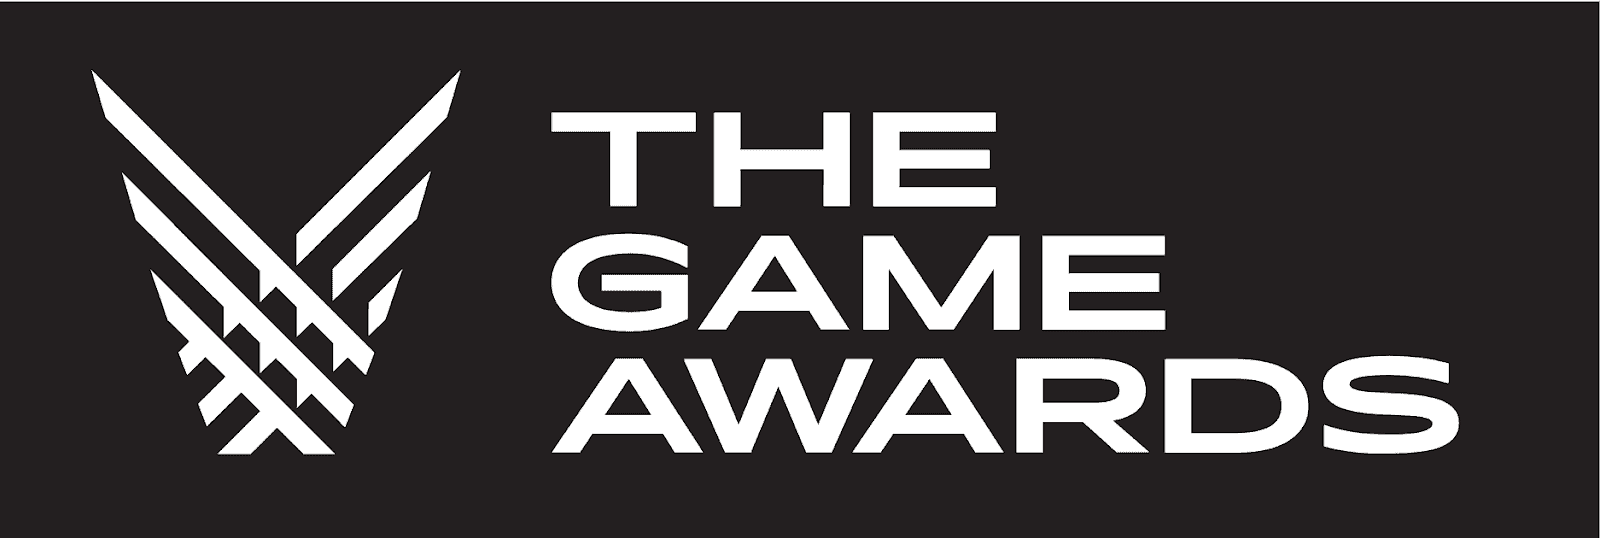 Where to Stream The Game Awards 2022 